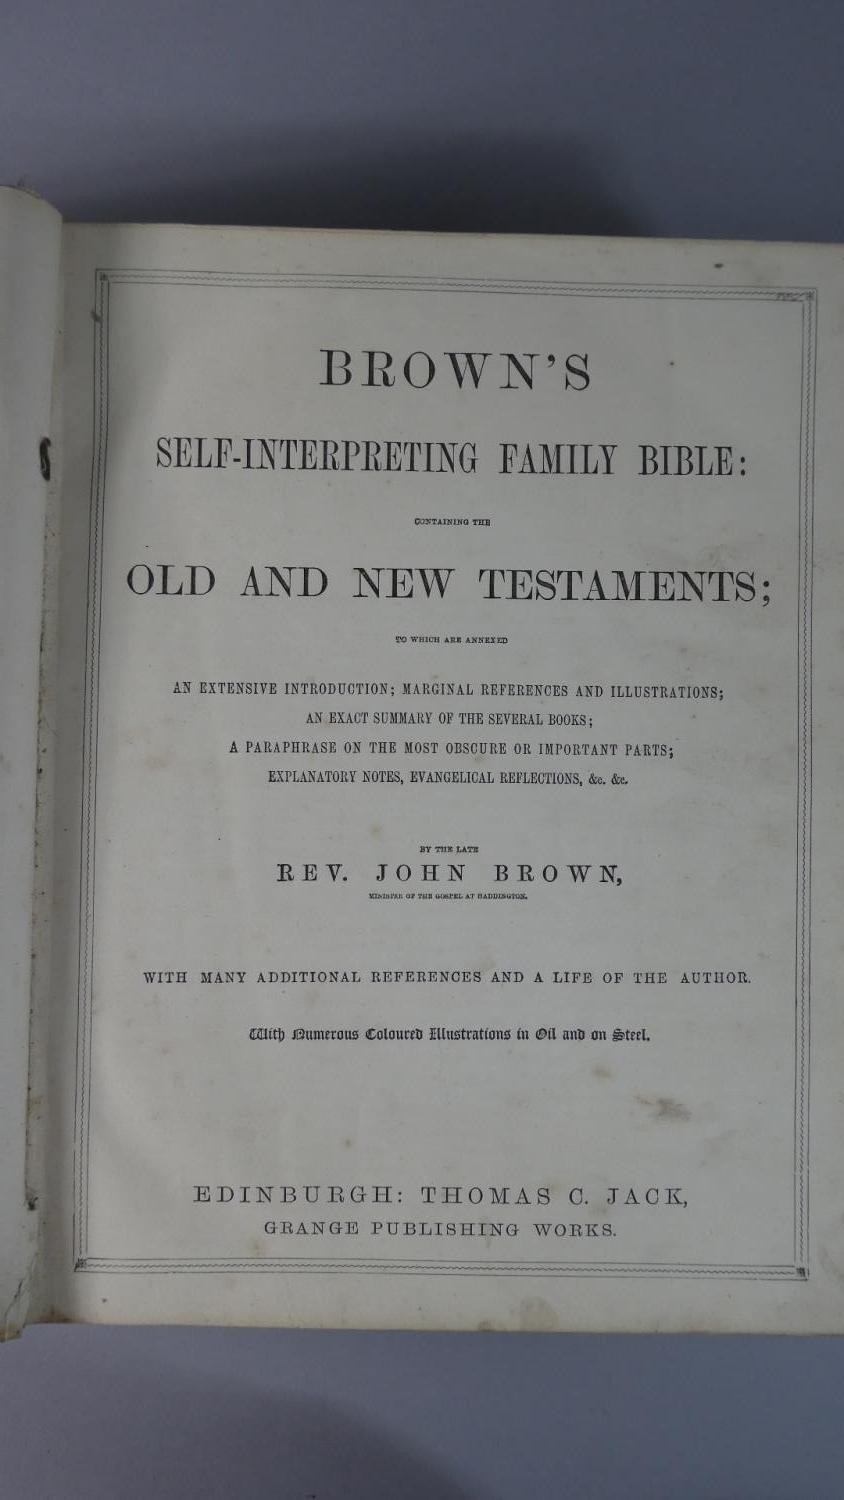 A 19th Century Self-interpreting Family Bible by Rev. John Brown, Published by Thomas C. Jack, - Image 5 of 6